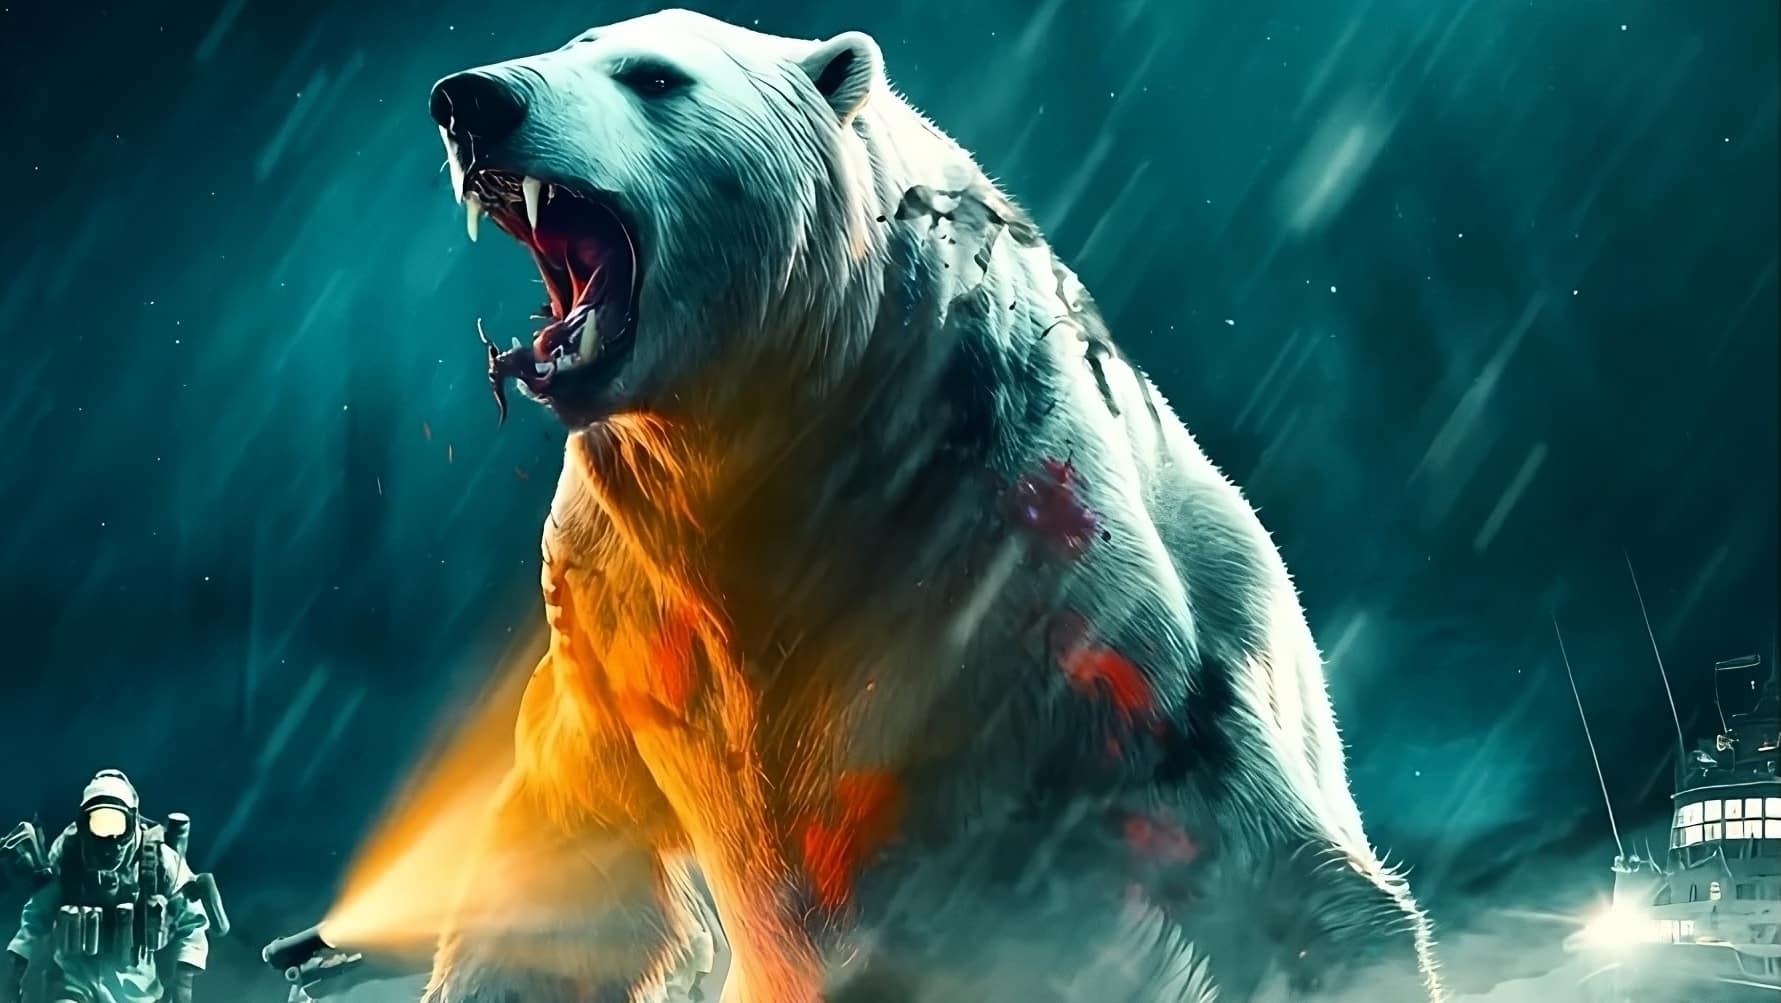 PAWS Is A New Creature Feature With An Animatronic Polar Bear